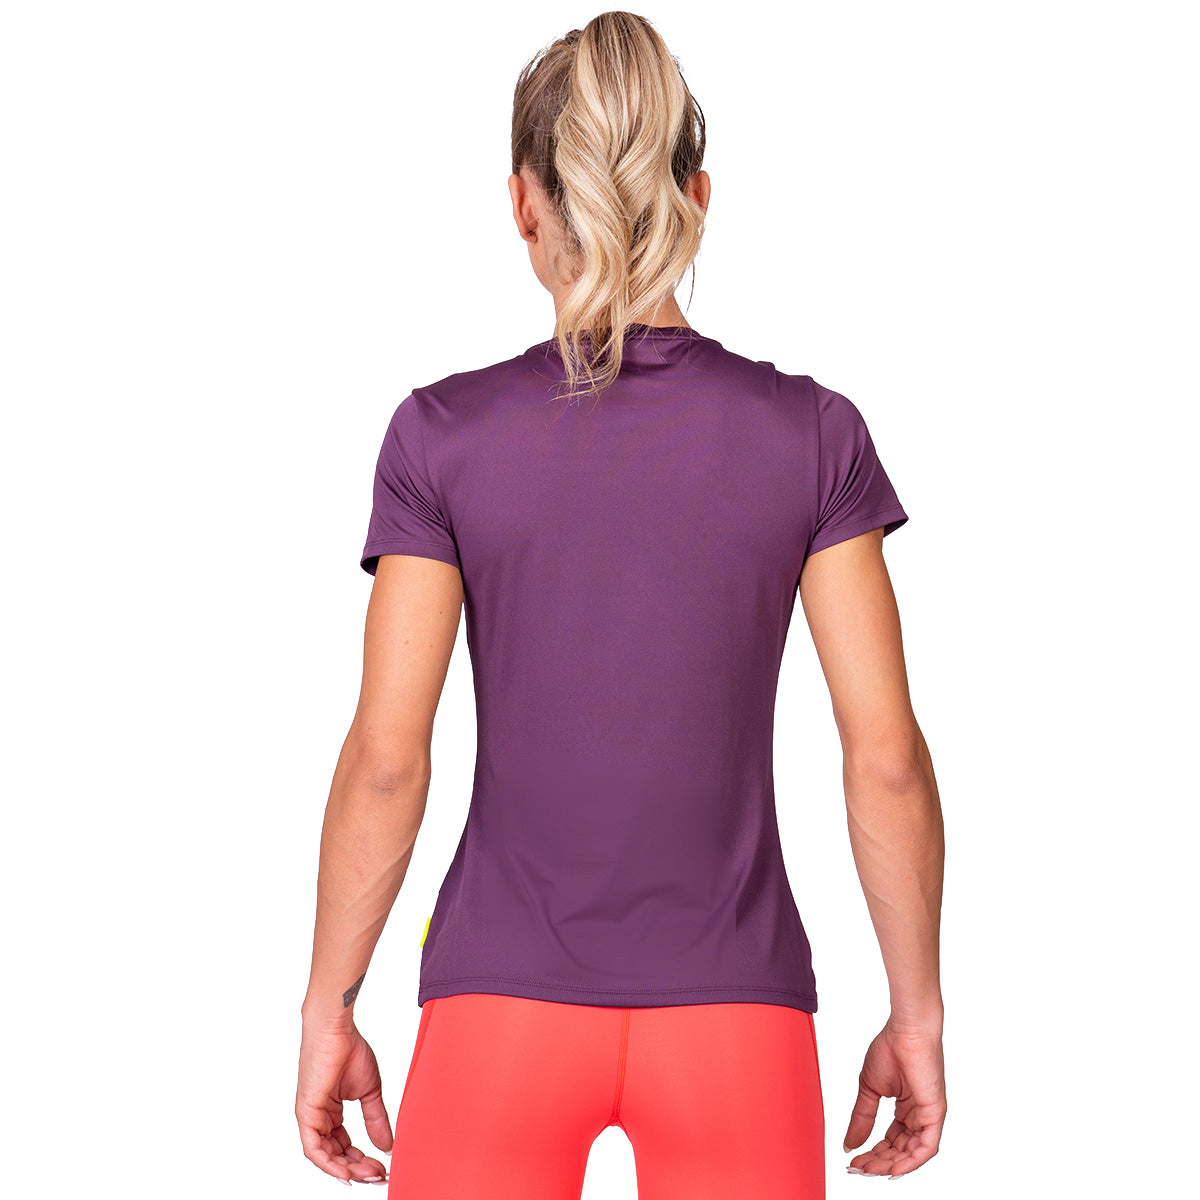 Activewear 110PRCNT Tight-Fit T-Shirt for Women | Gym Aesthetics – Gym ...